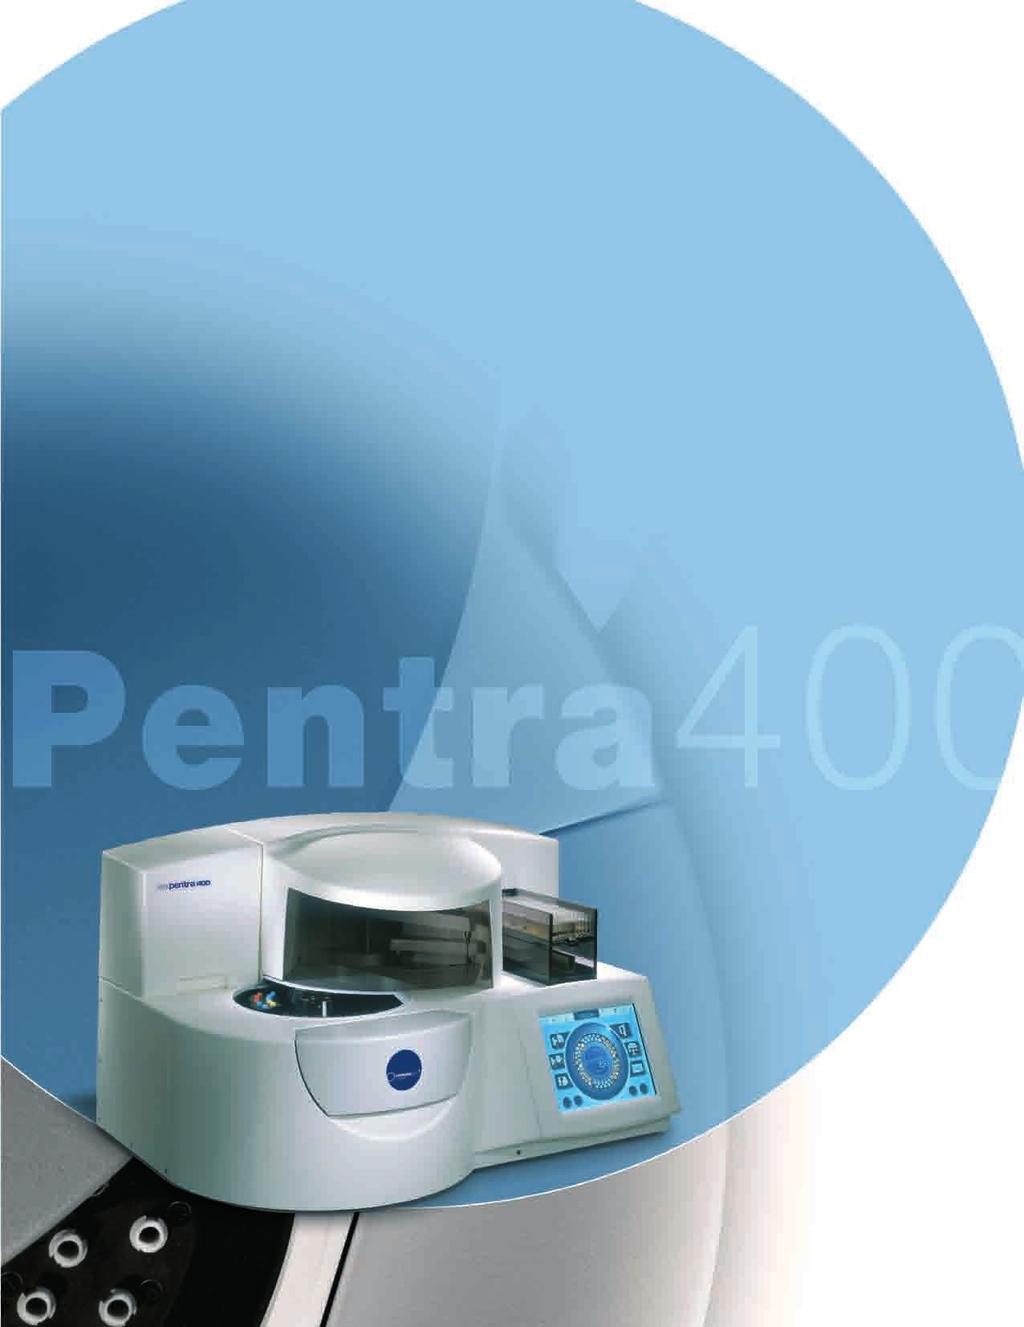 ABX Pentra 400 Clinical Chemistry System Up